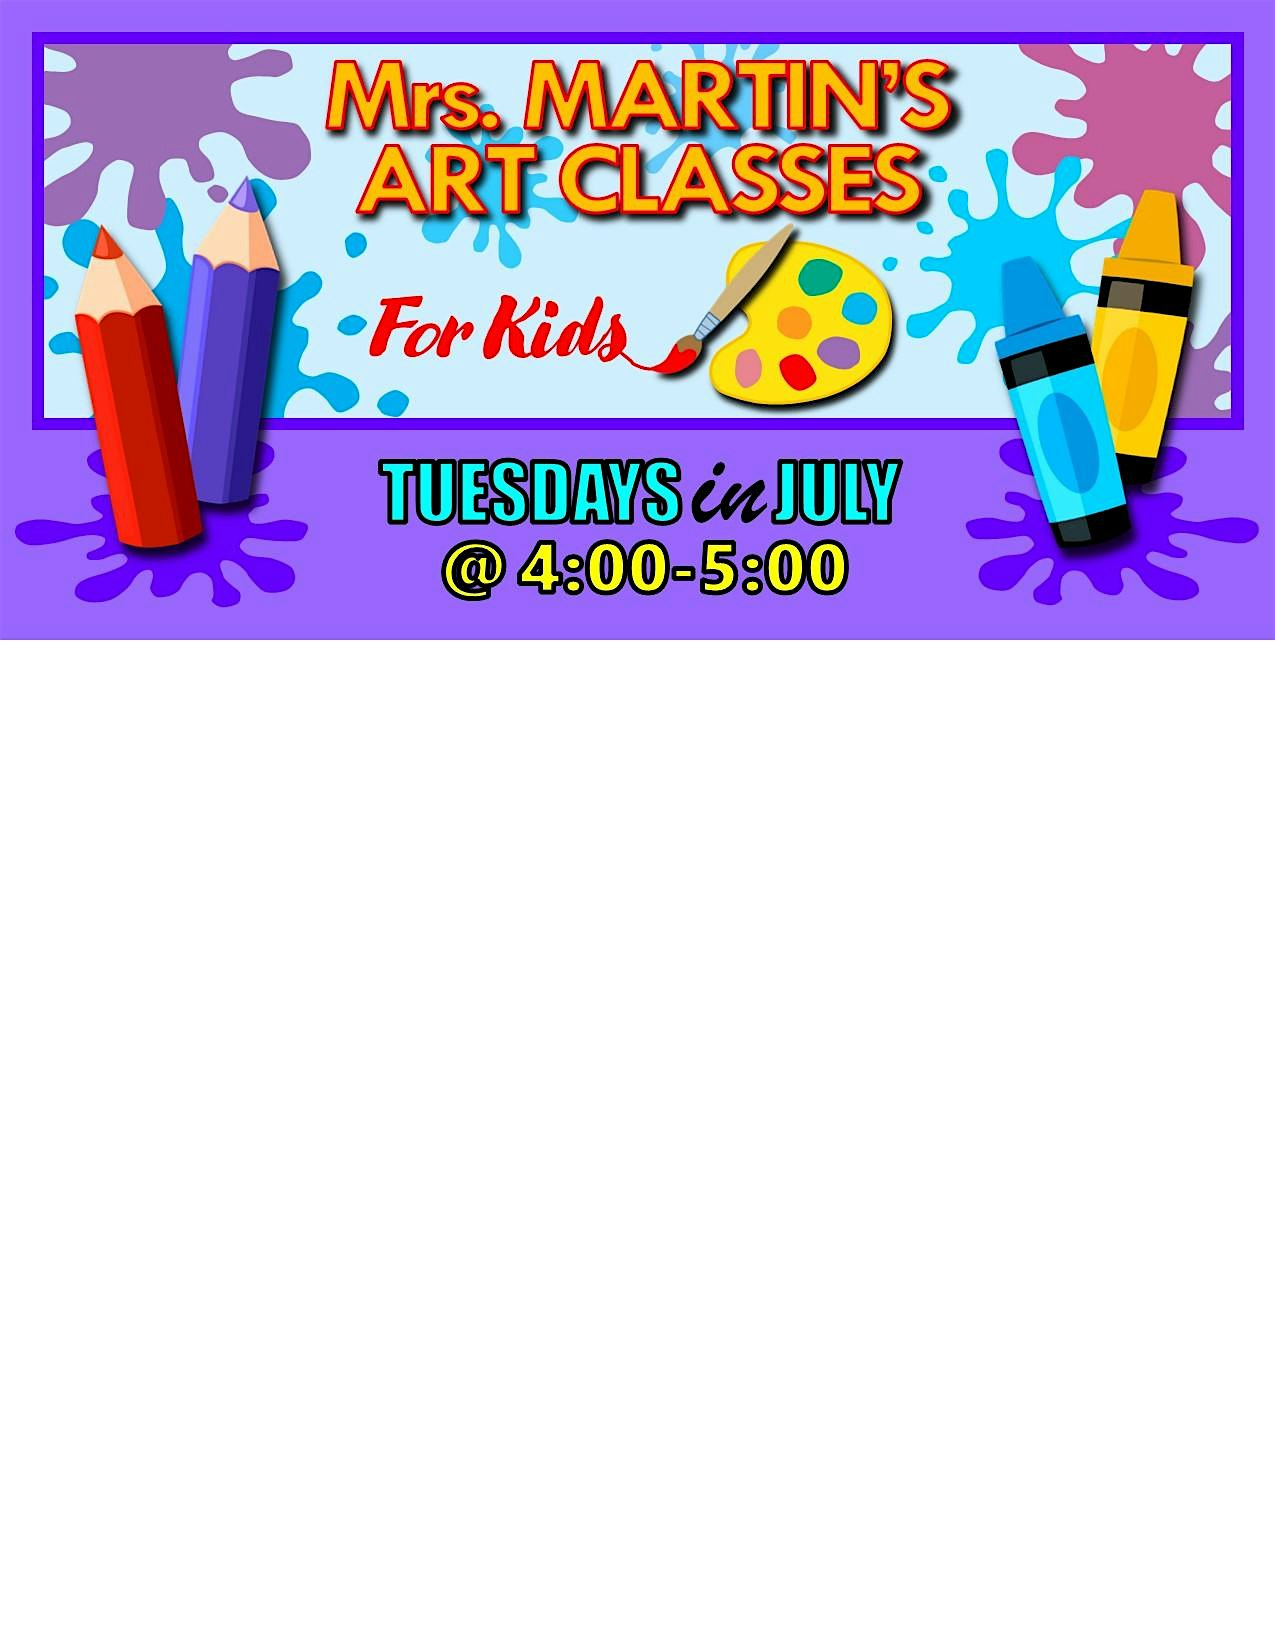 Mrs. Martin's Art Classes in JULY ~Tuesdays @4:00-5:00